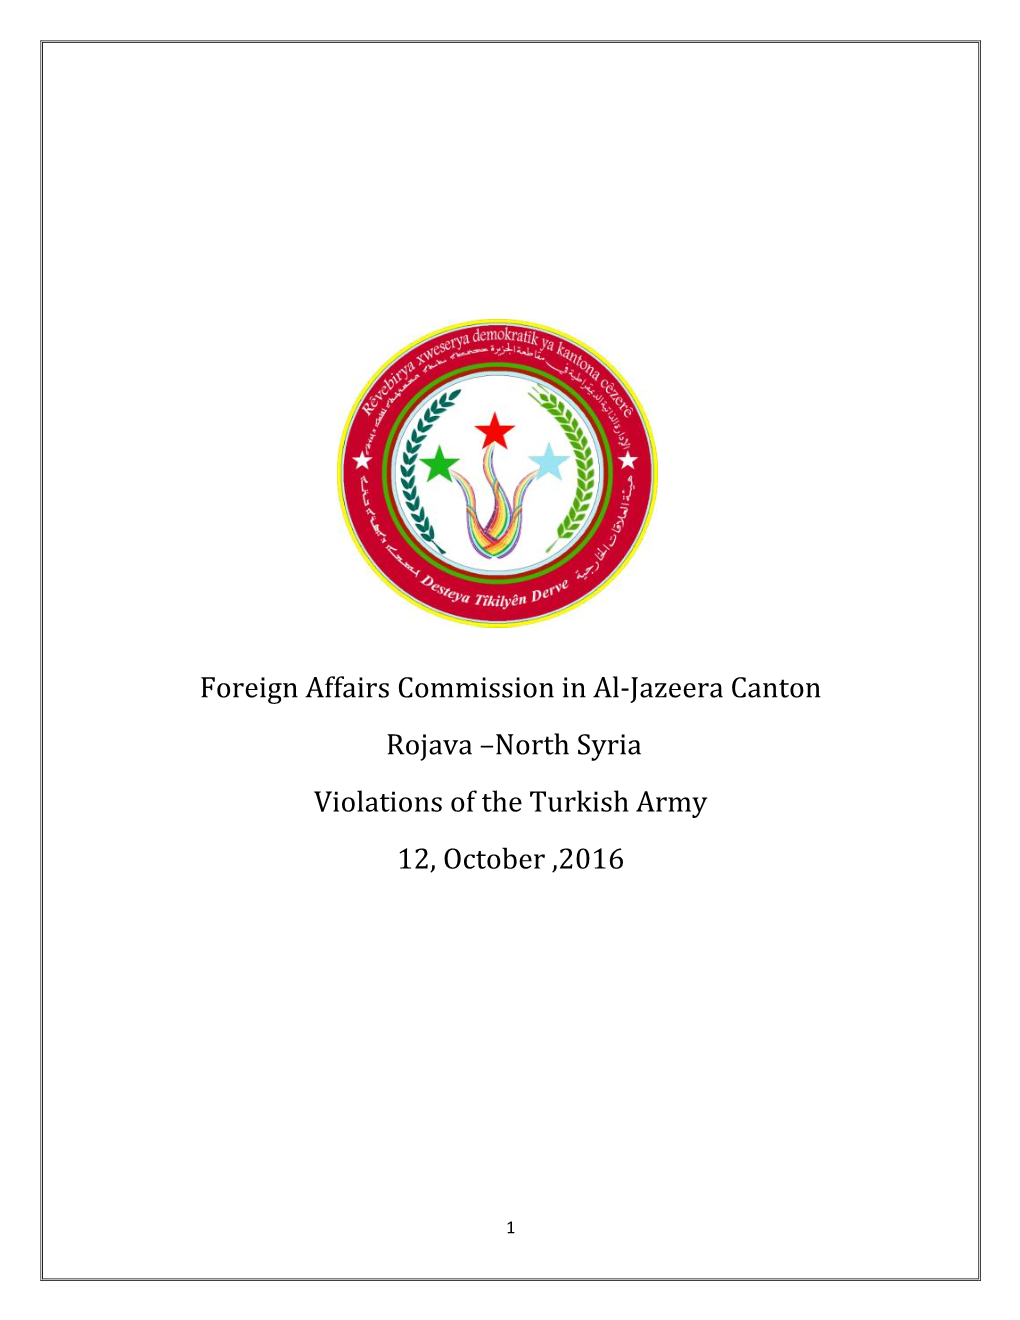 Violations of the Turkish Army in Rojava